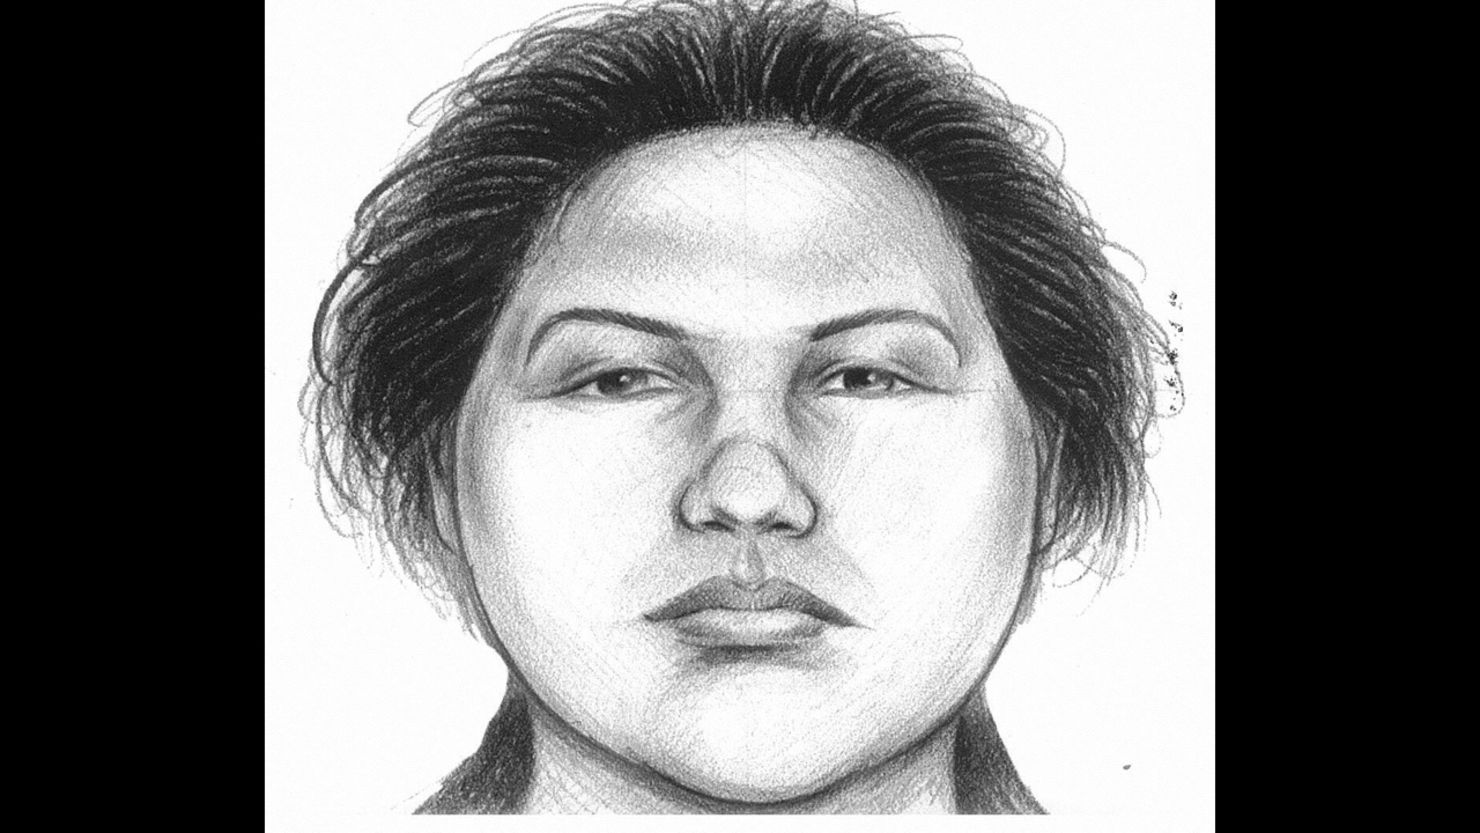 Police investigating the case released this sketch of the person they were seeking.